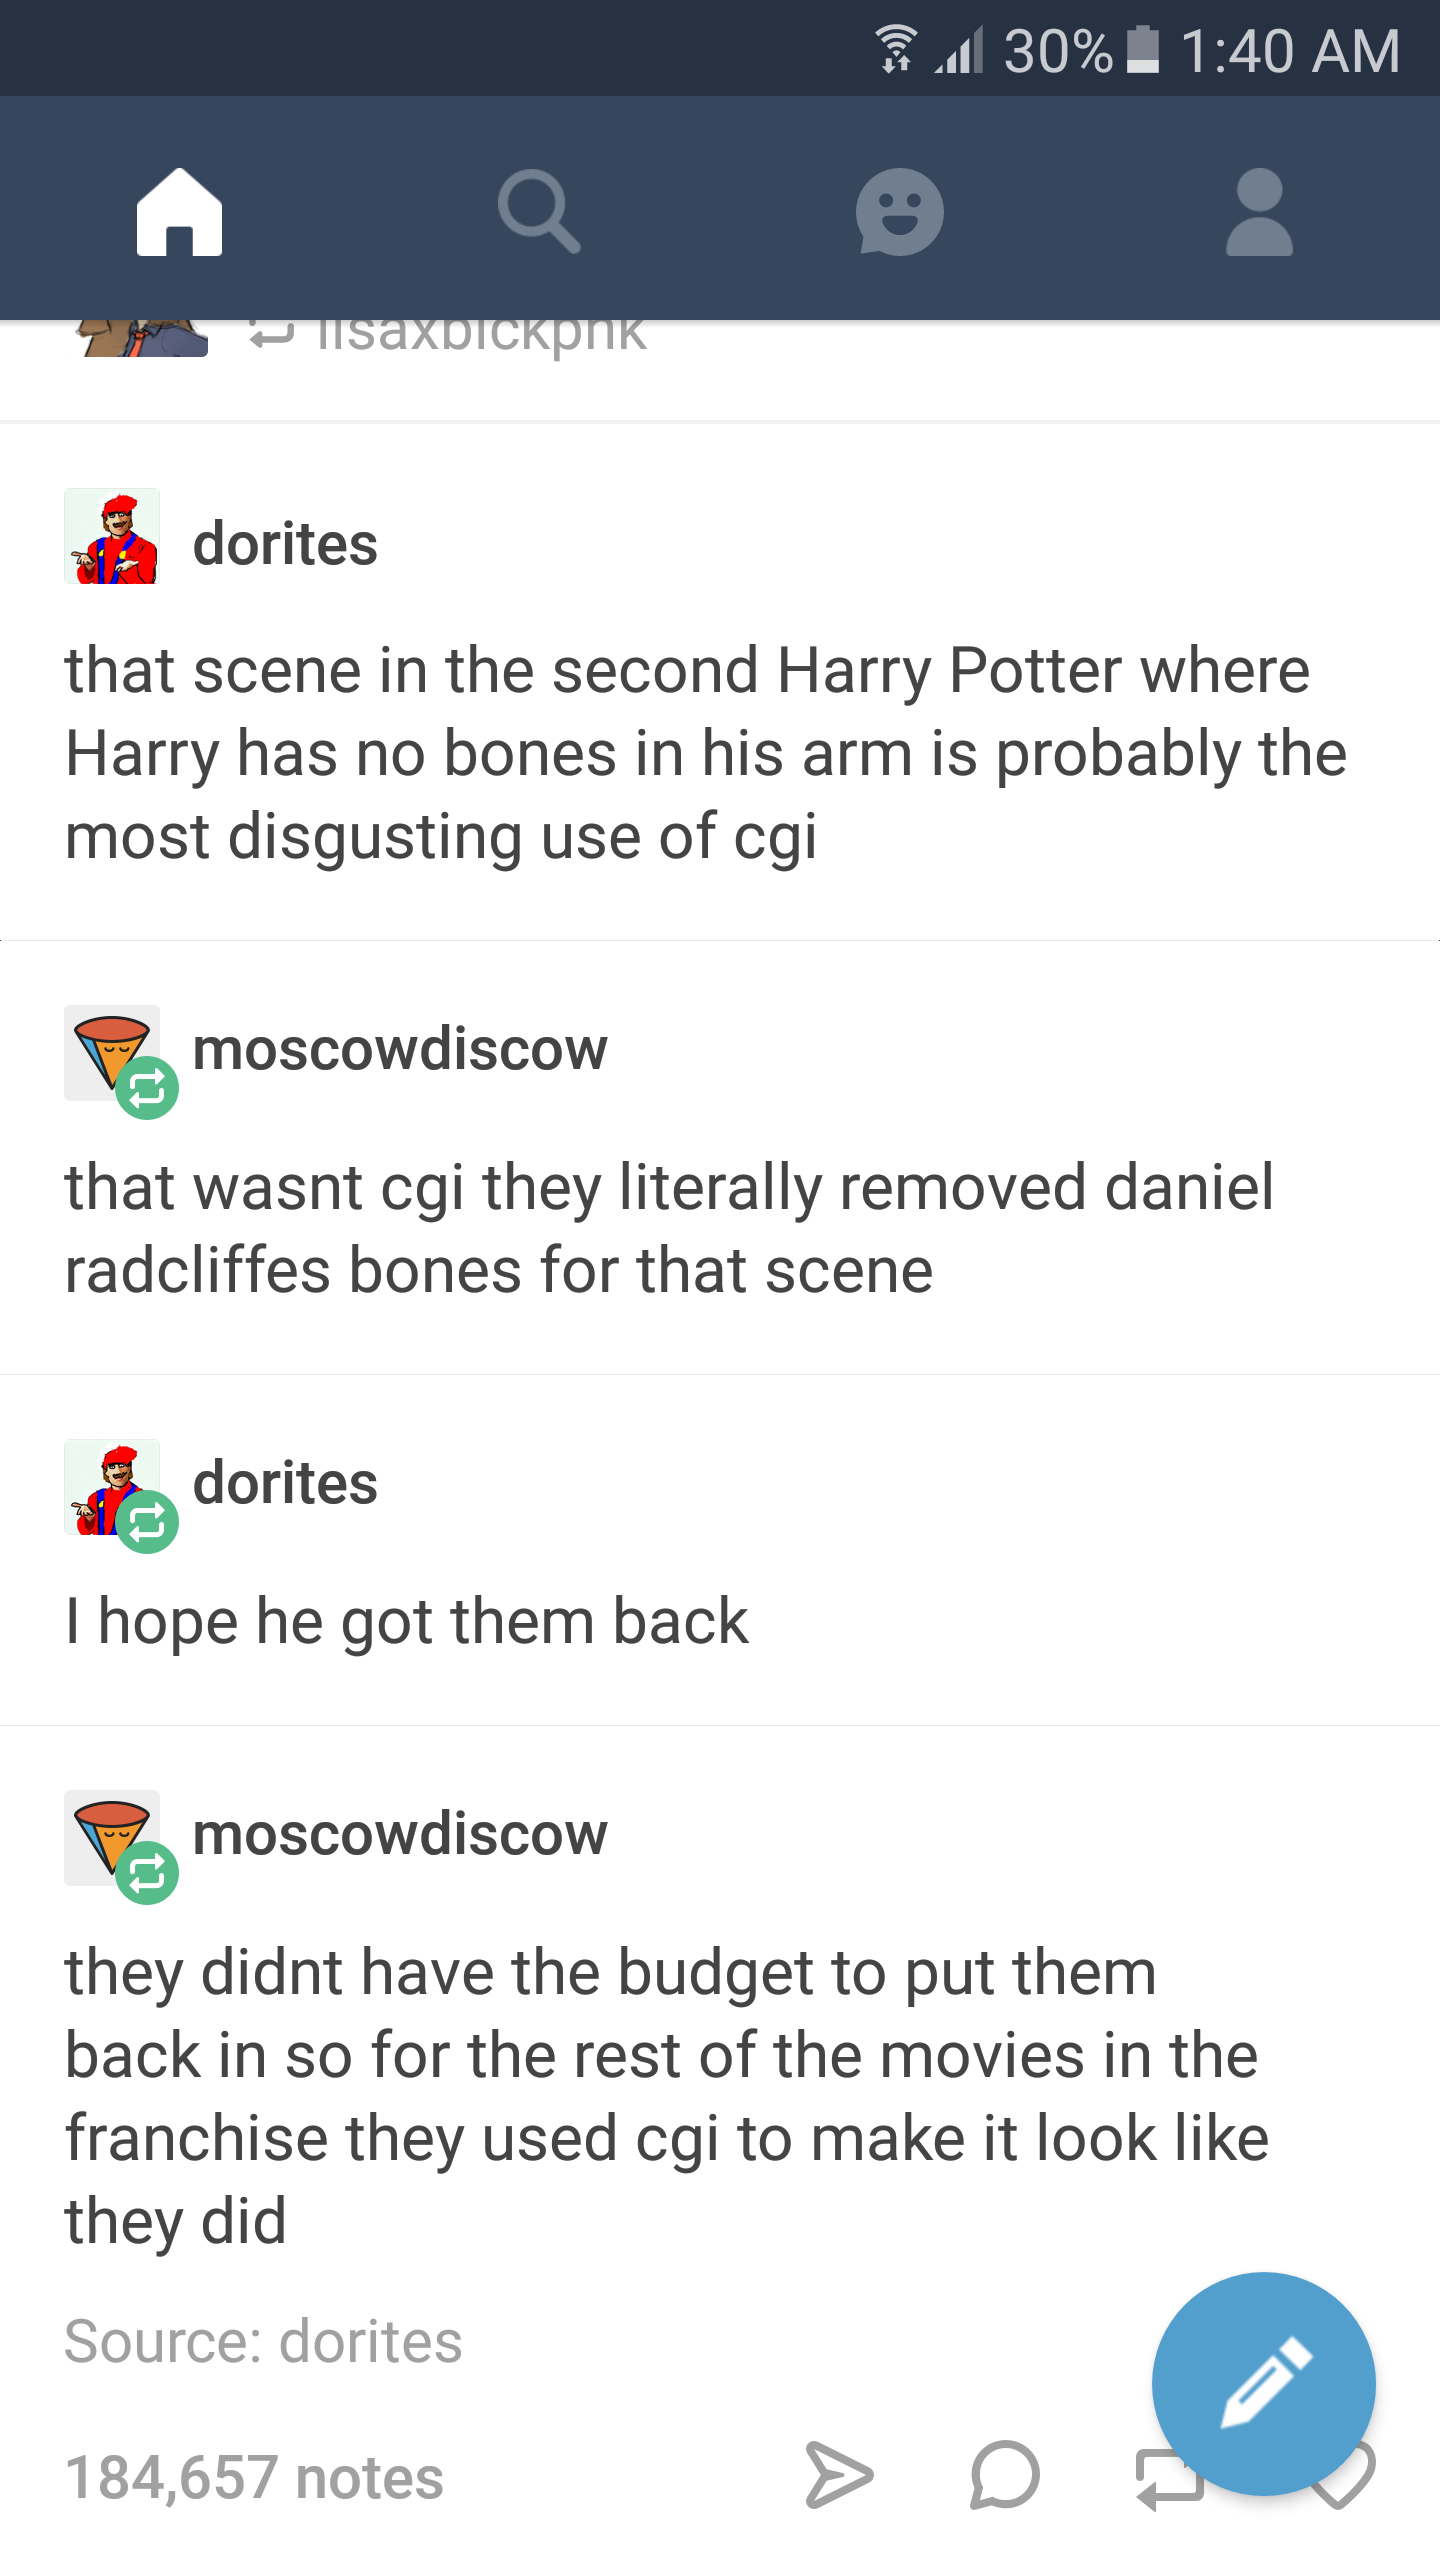 screenshot - 1 30% SaXDICKPNK dorites that scene in the second Harry Potter where Harry has no bones in his arm is probably the most disgusting use of cgi P moscowdiscow that wasnt cgi they literally removed daniel radcliffes bones for that scene dorites 